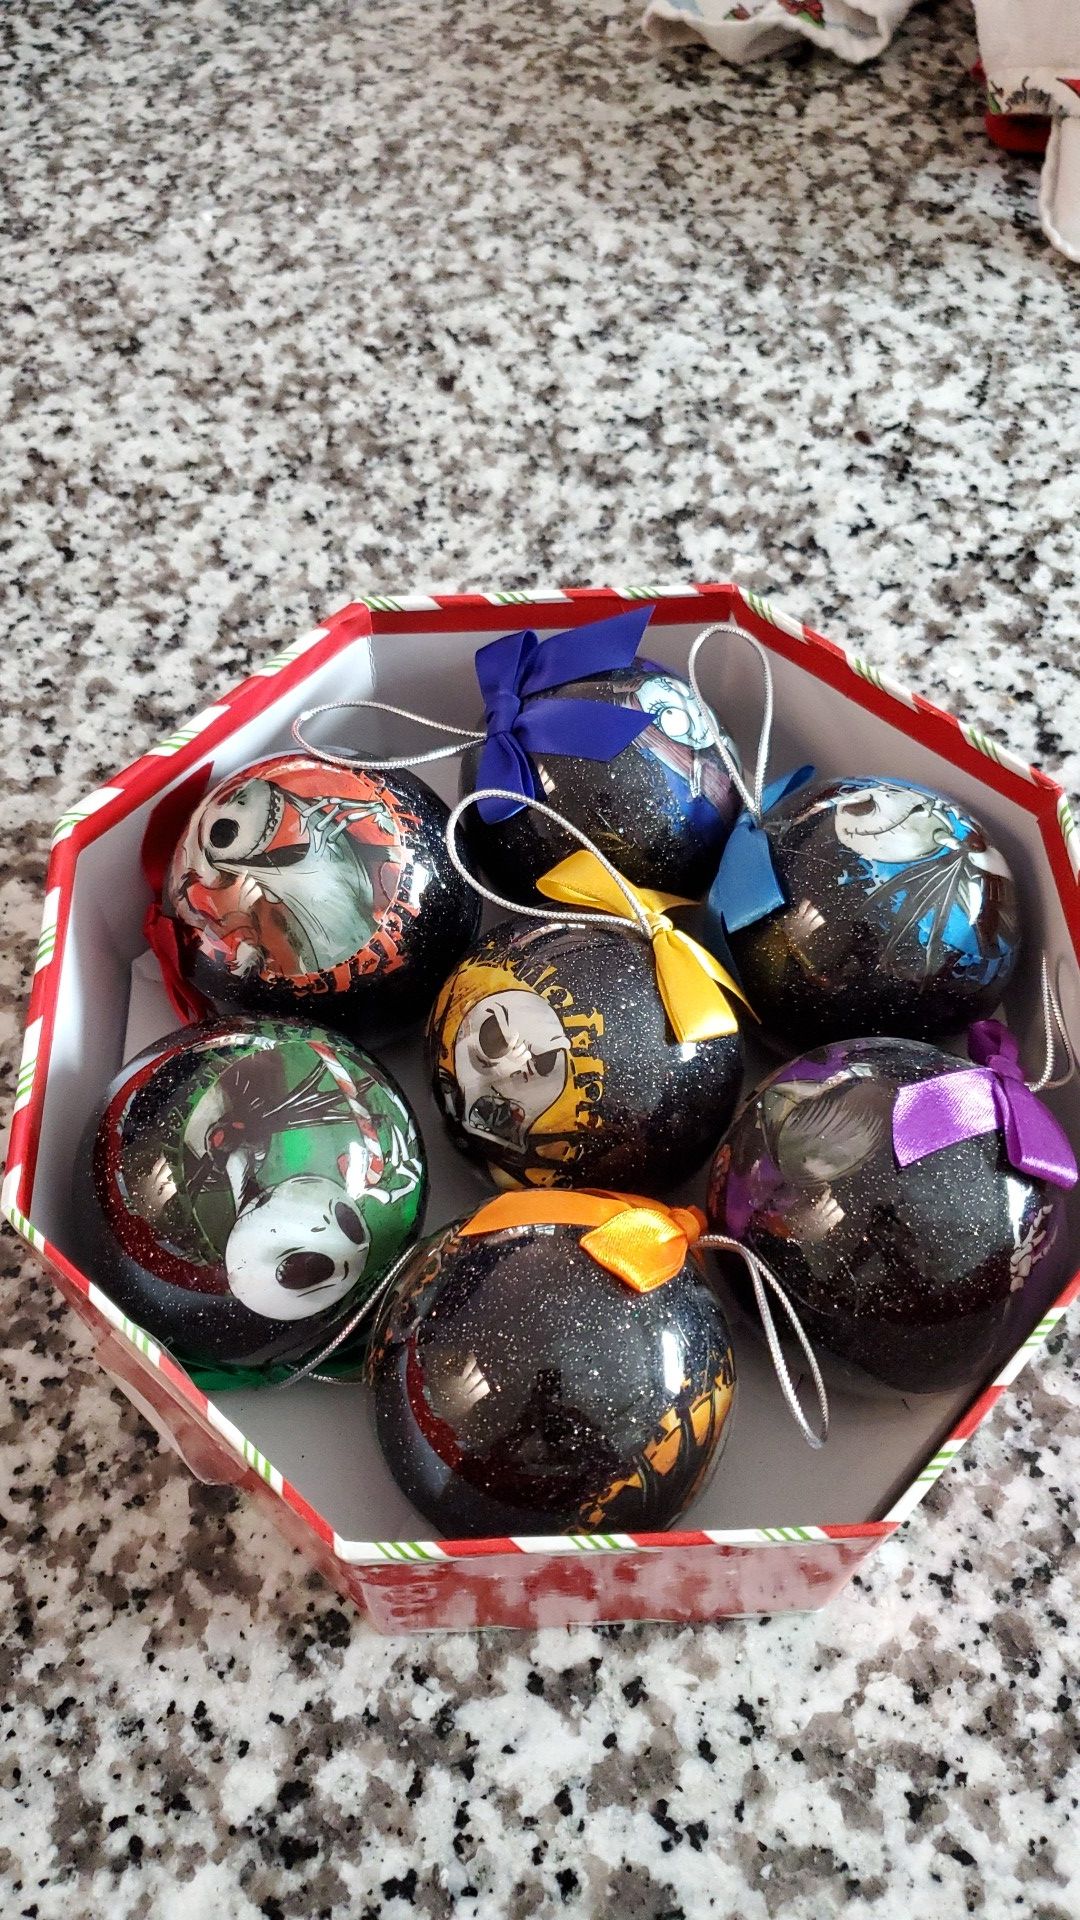 Nightmare before Christmas ornaments